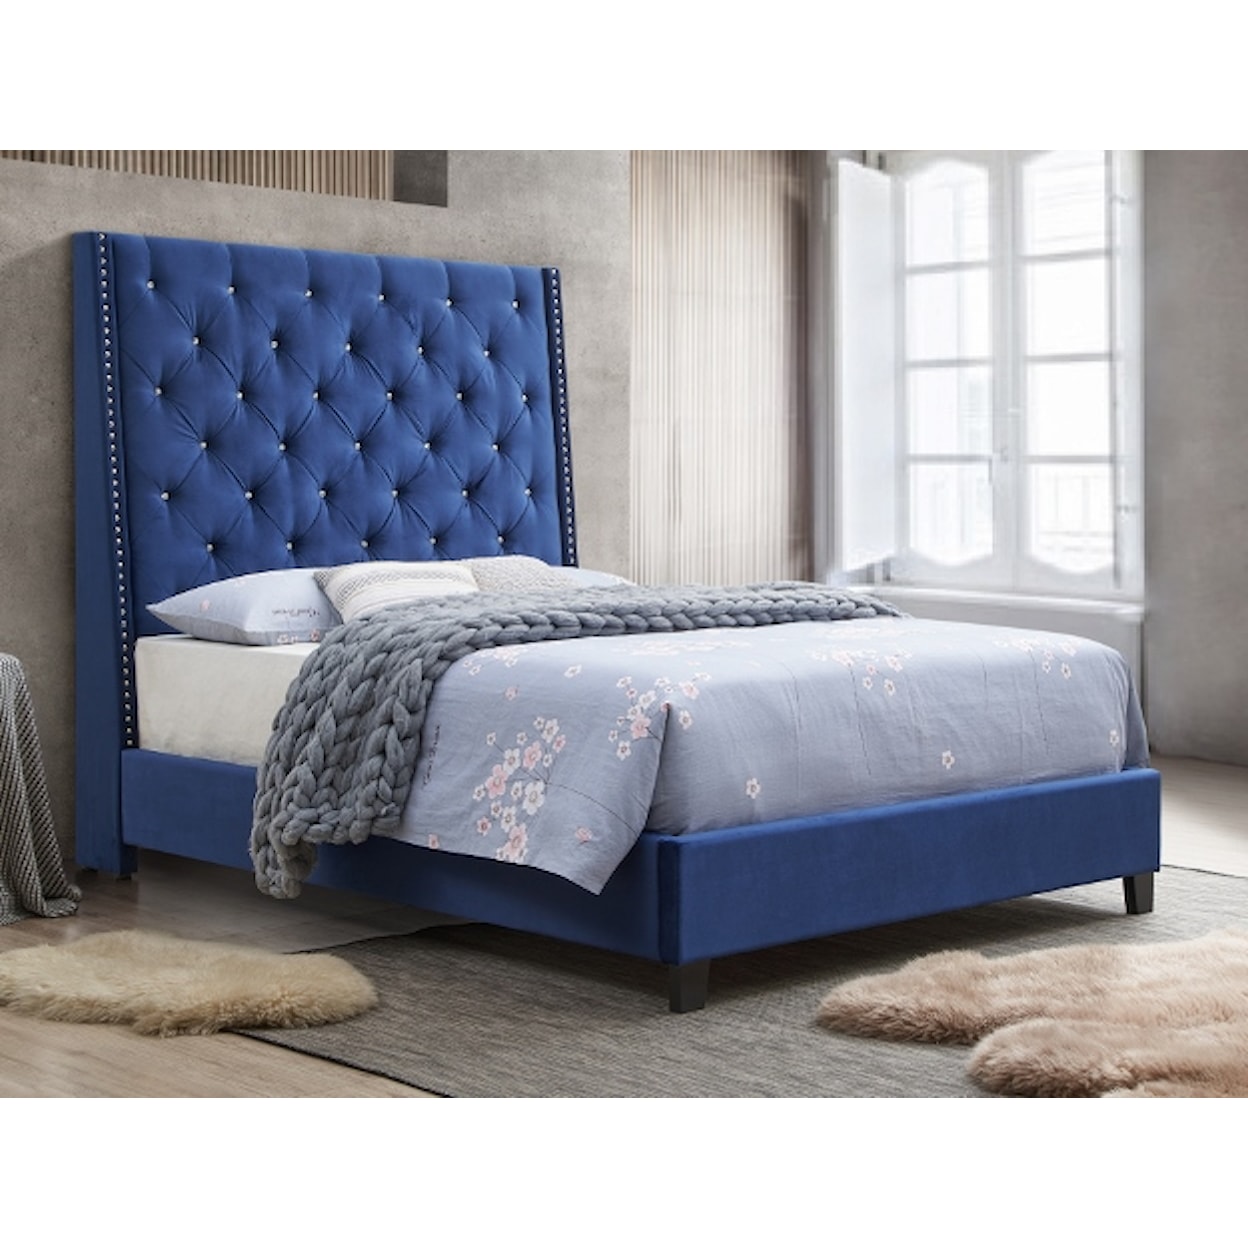 CM Chantilly Bed Queen Upholstered Bed